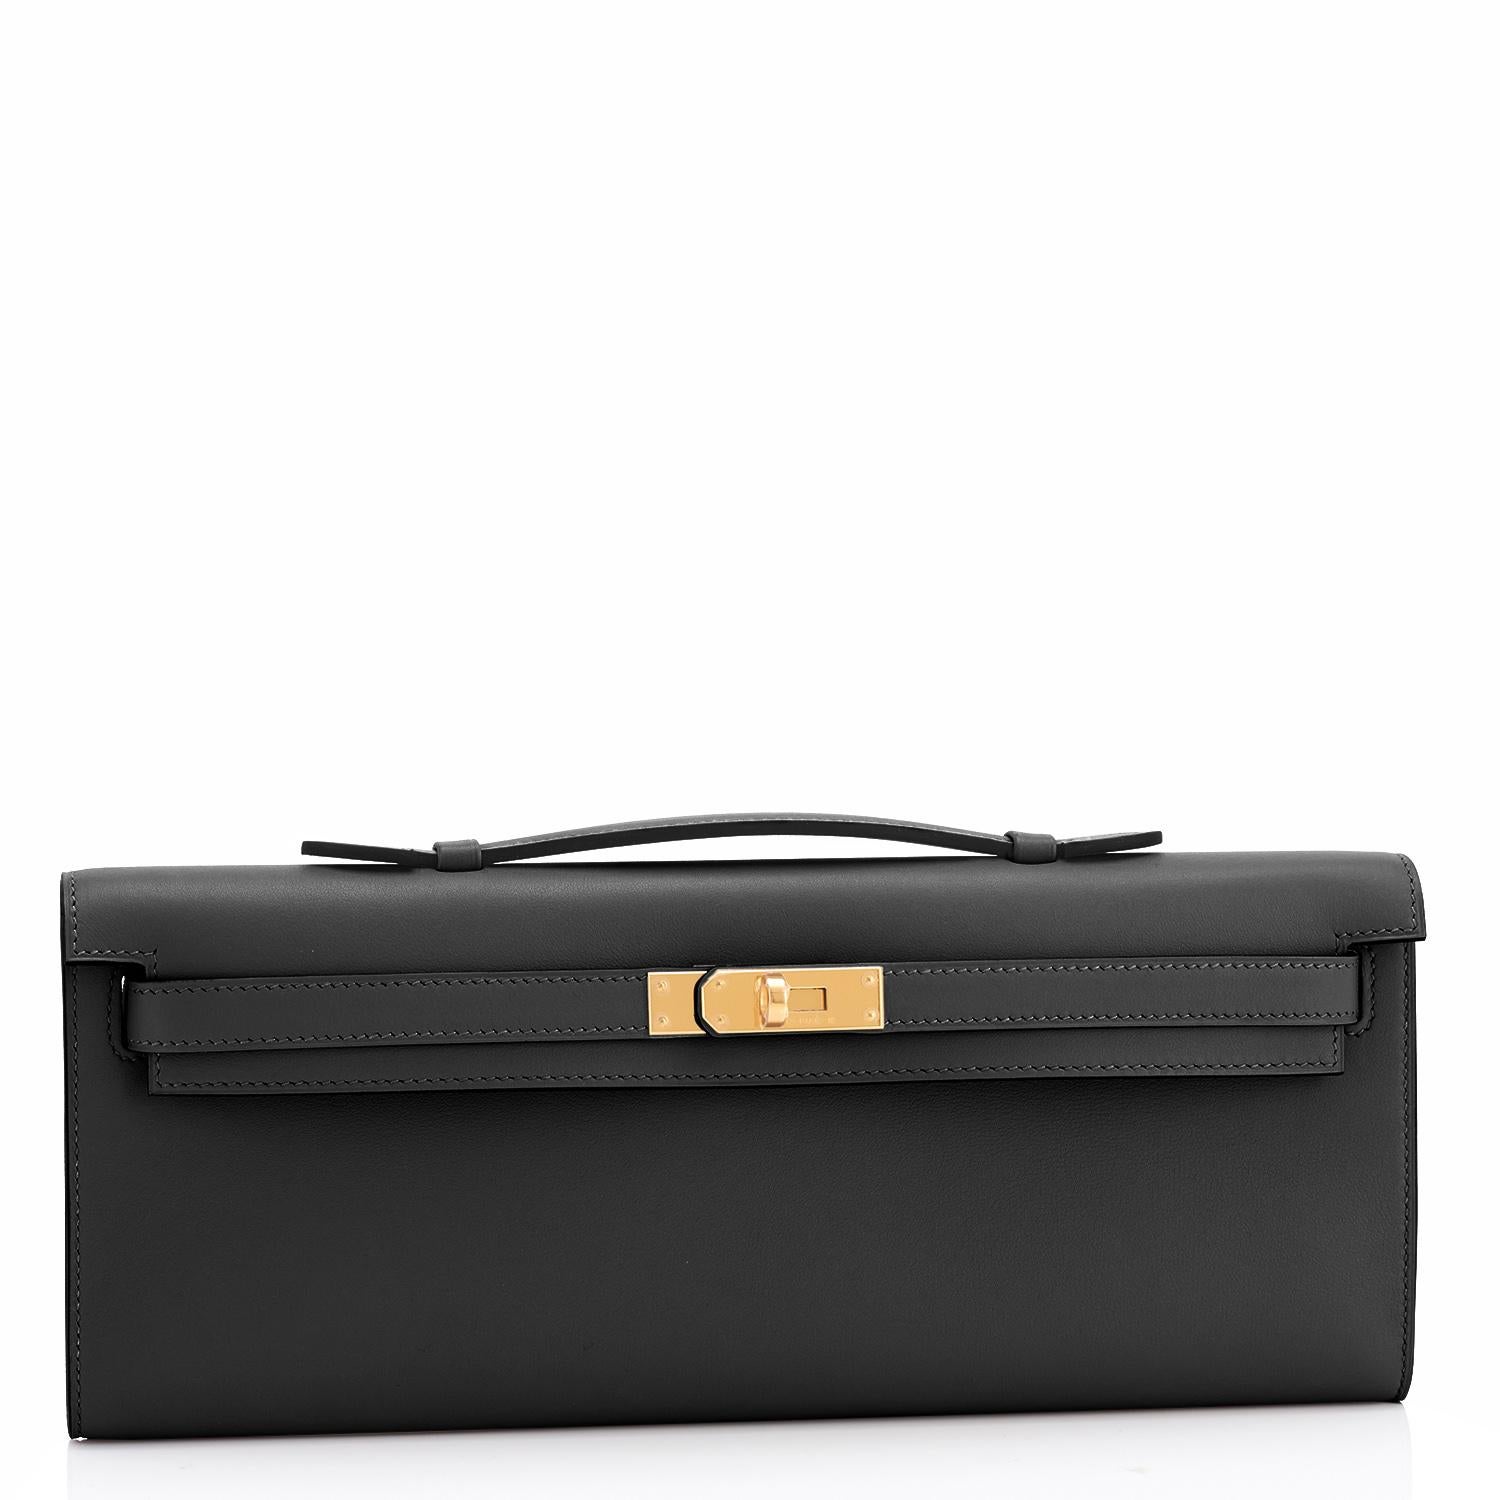 Hermes Kelly Cut Black Clutch Pochette Swift Gold Hardware NEW
Brand New in Box. Store fresh. Pristine condition (with plastic on hardware).
Perfect gift! Comes with Hermes protective felt, sleeper, box and ribbon.
If you buy only one clutch for